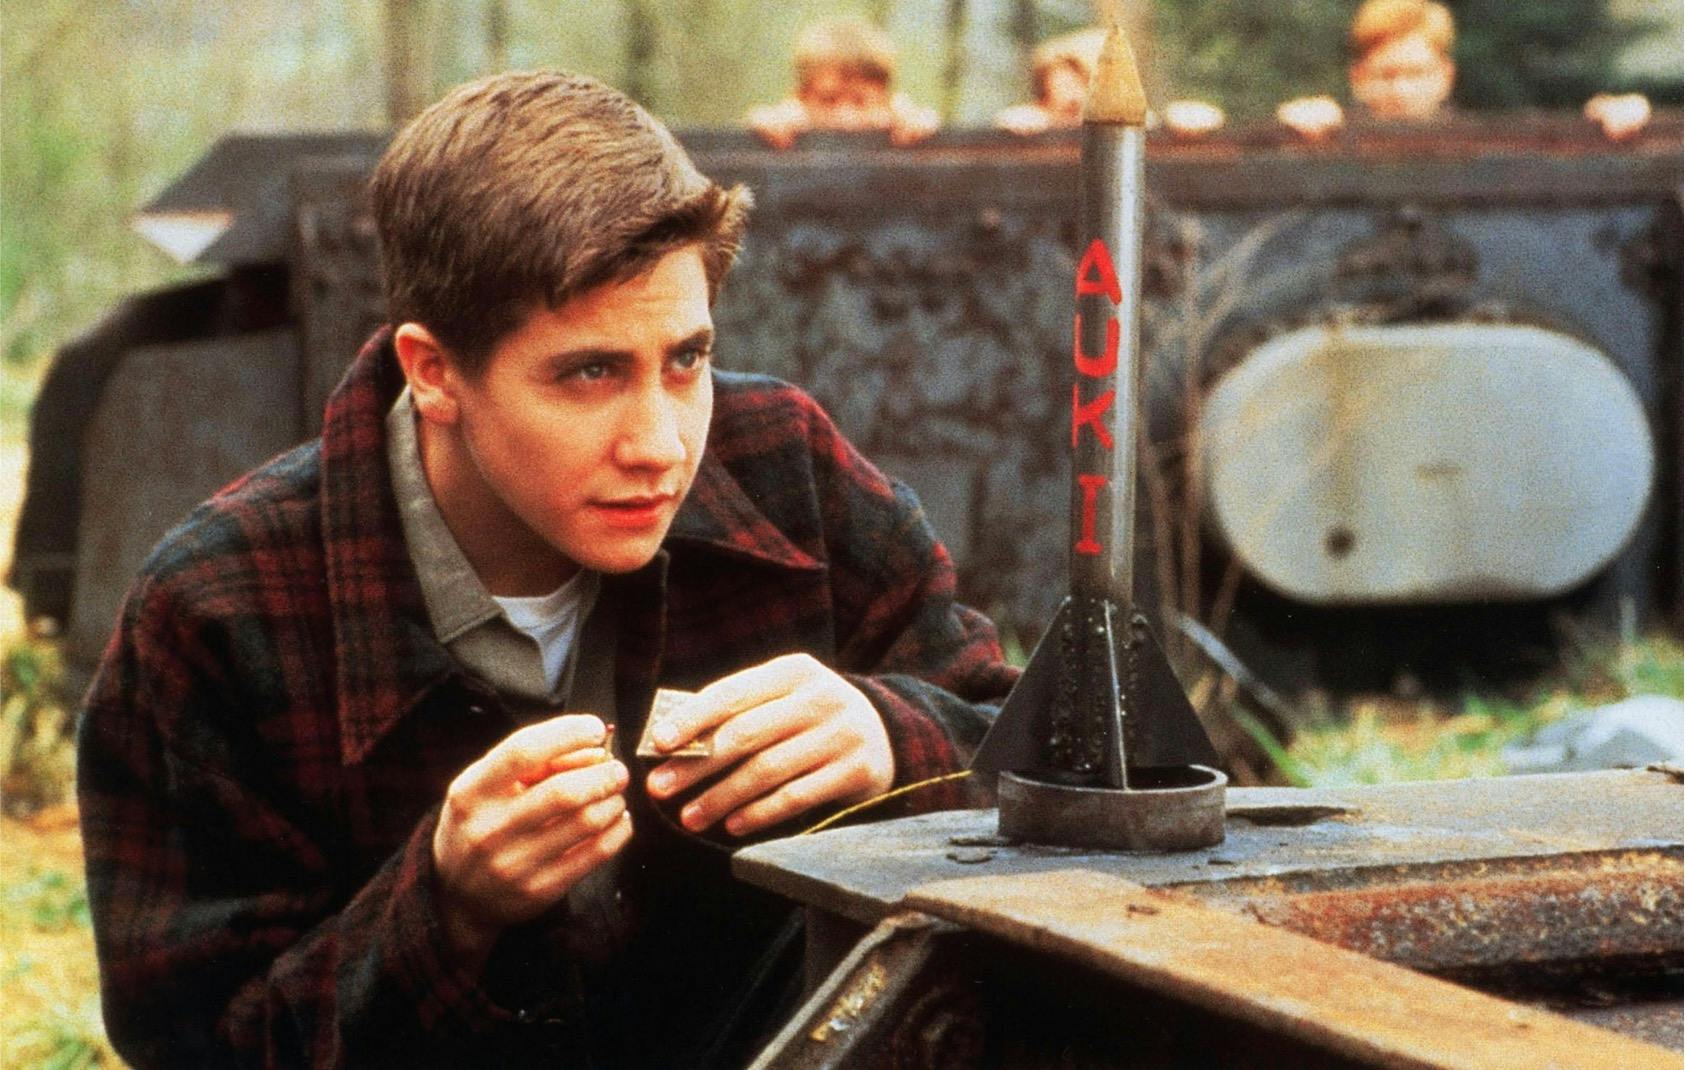 Homer Hickman (Jake Gyllenhaal) in October Sky (1999) crouches beside a homemade rocket. He wears a plaid flannel jacket and looks excited and focused.